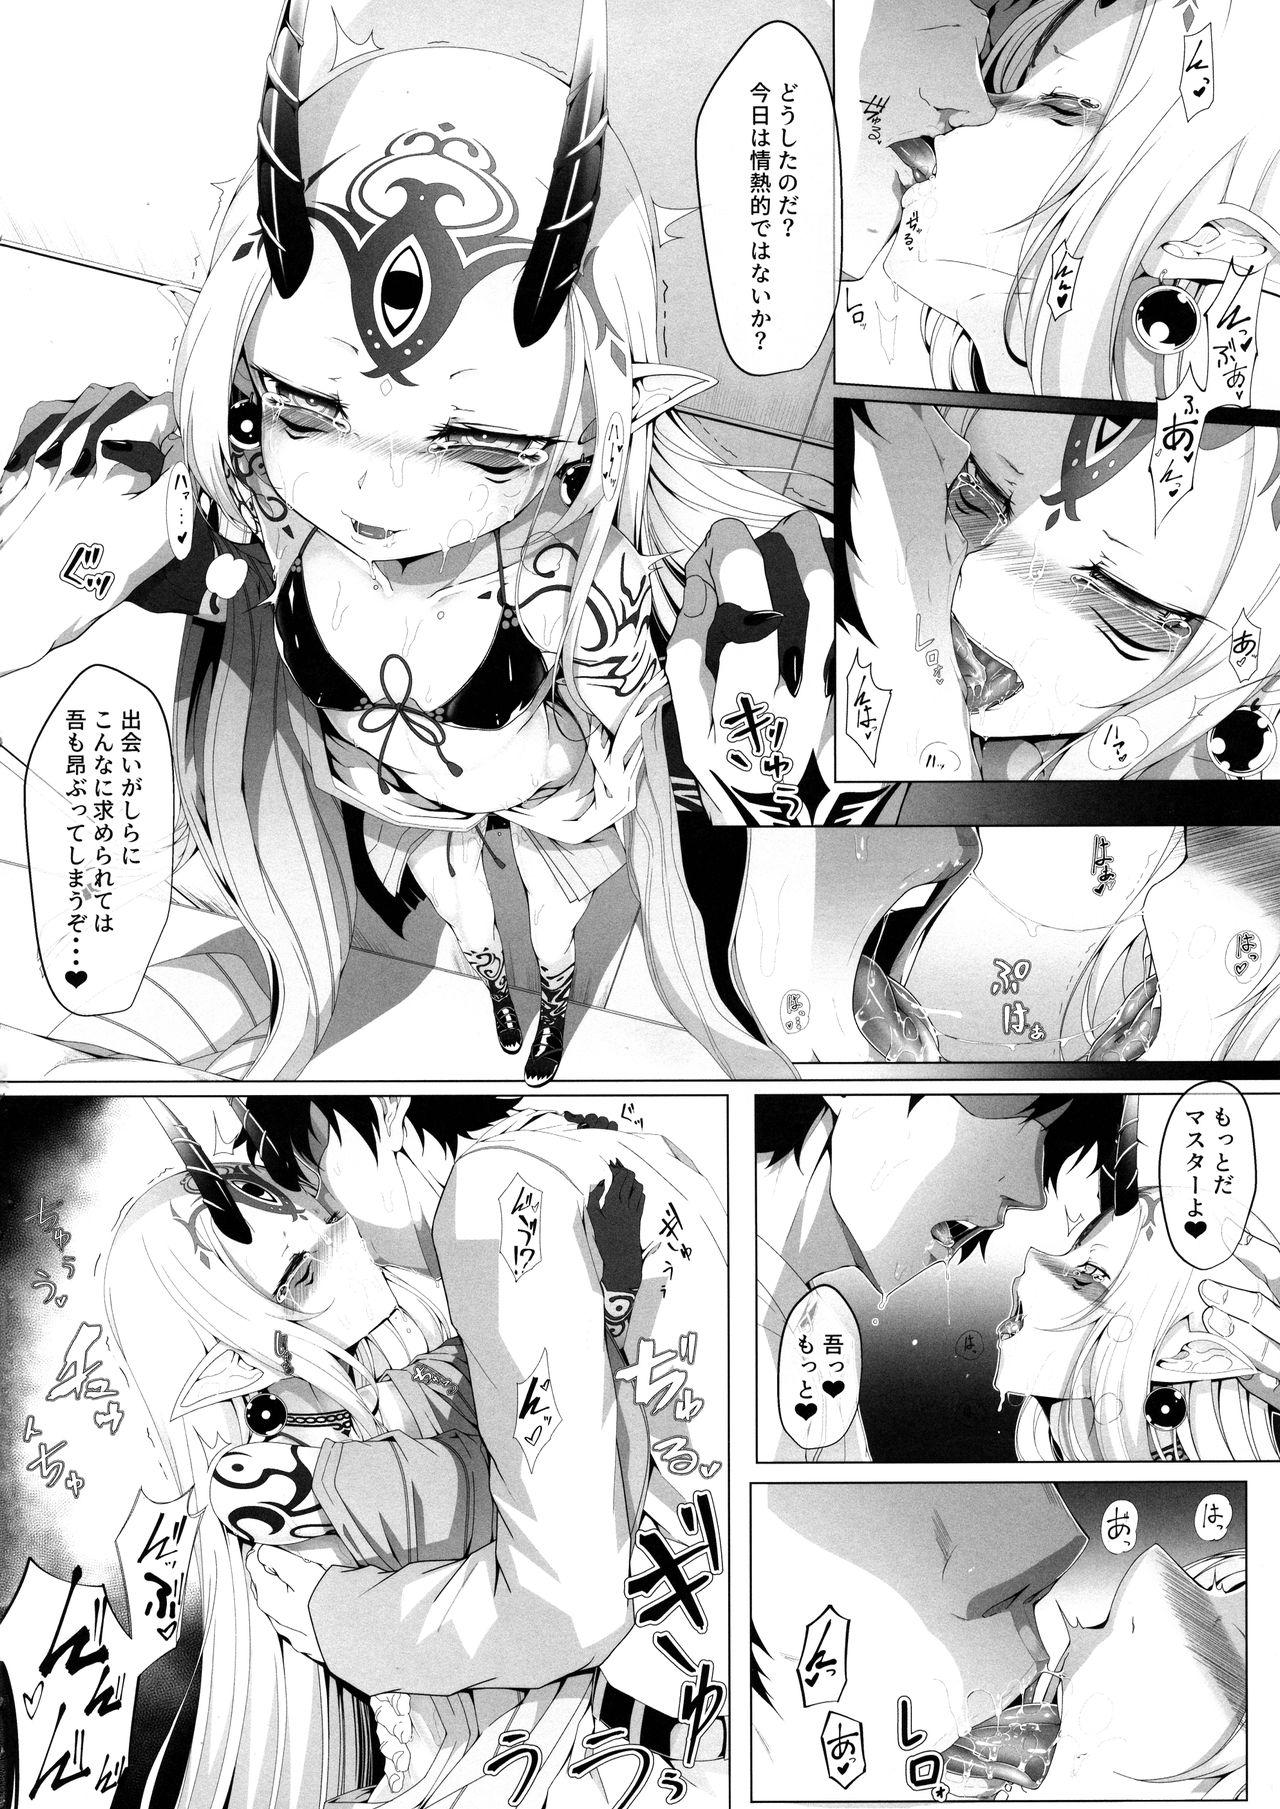 Cheating M.P. Vol. 20 - Fate grand order Viet Nam - Page 4